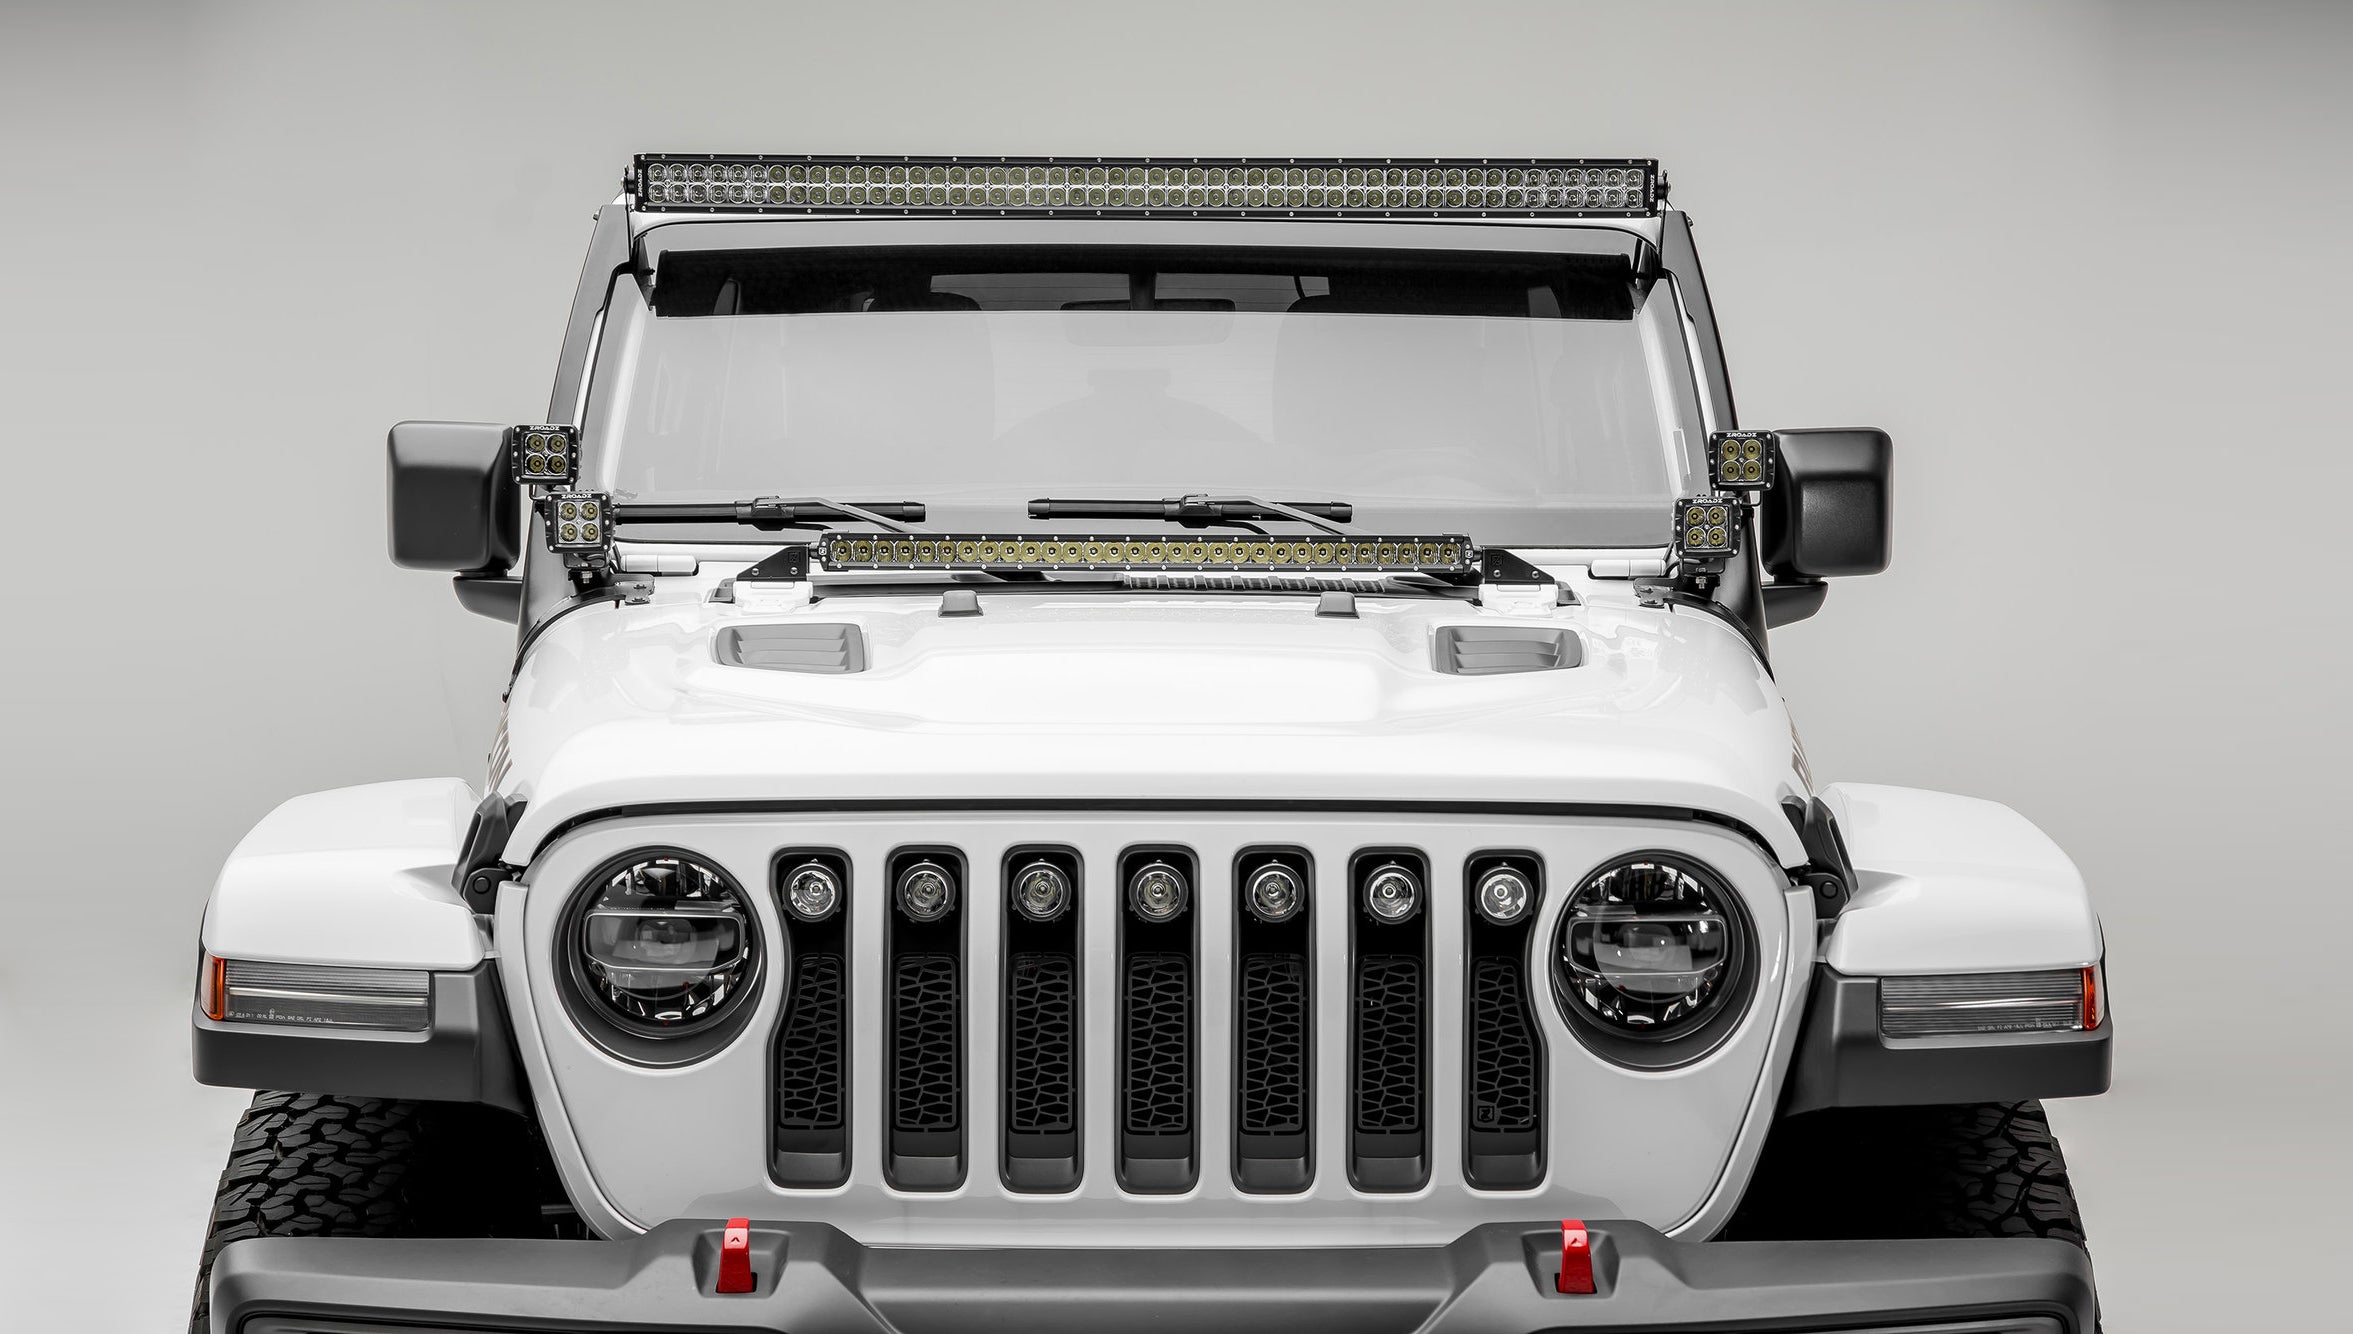 40 LED light bar for night and off-road driving